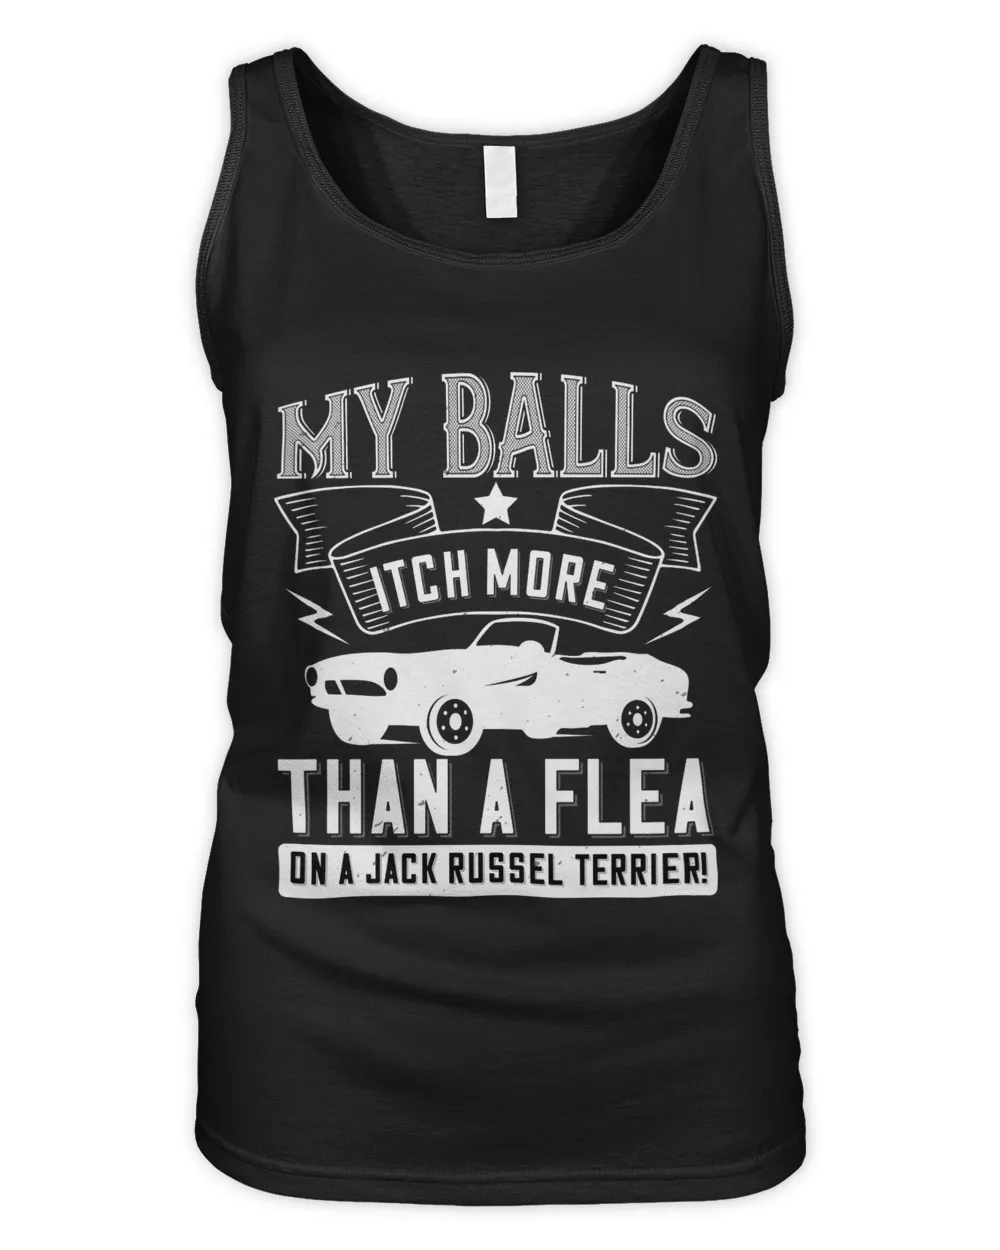 02 My balls itch more than a flea on a jack russel terrier!-01